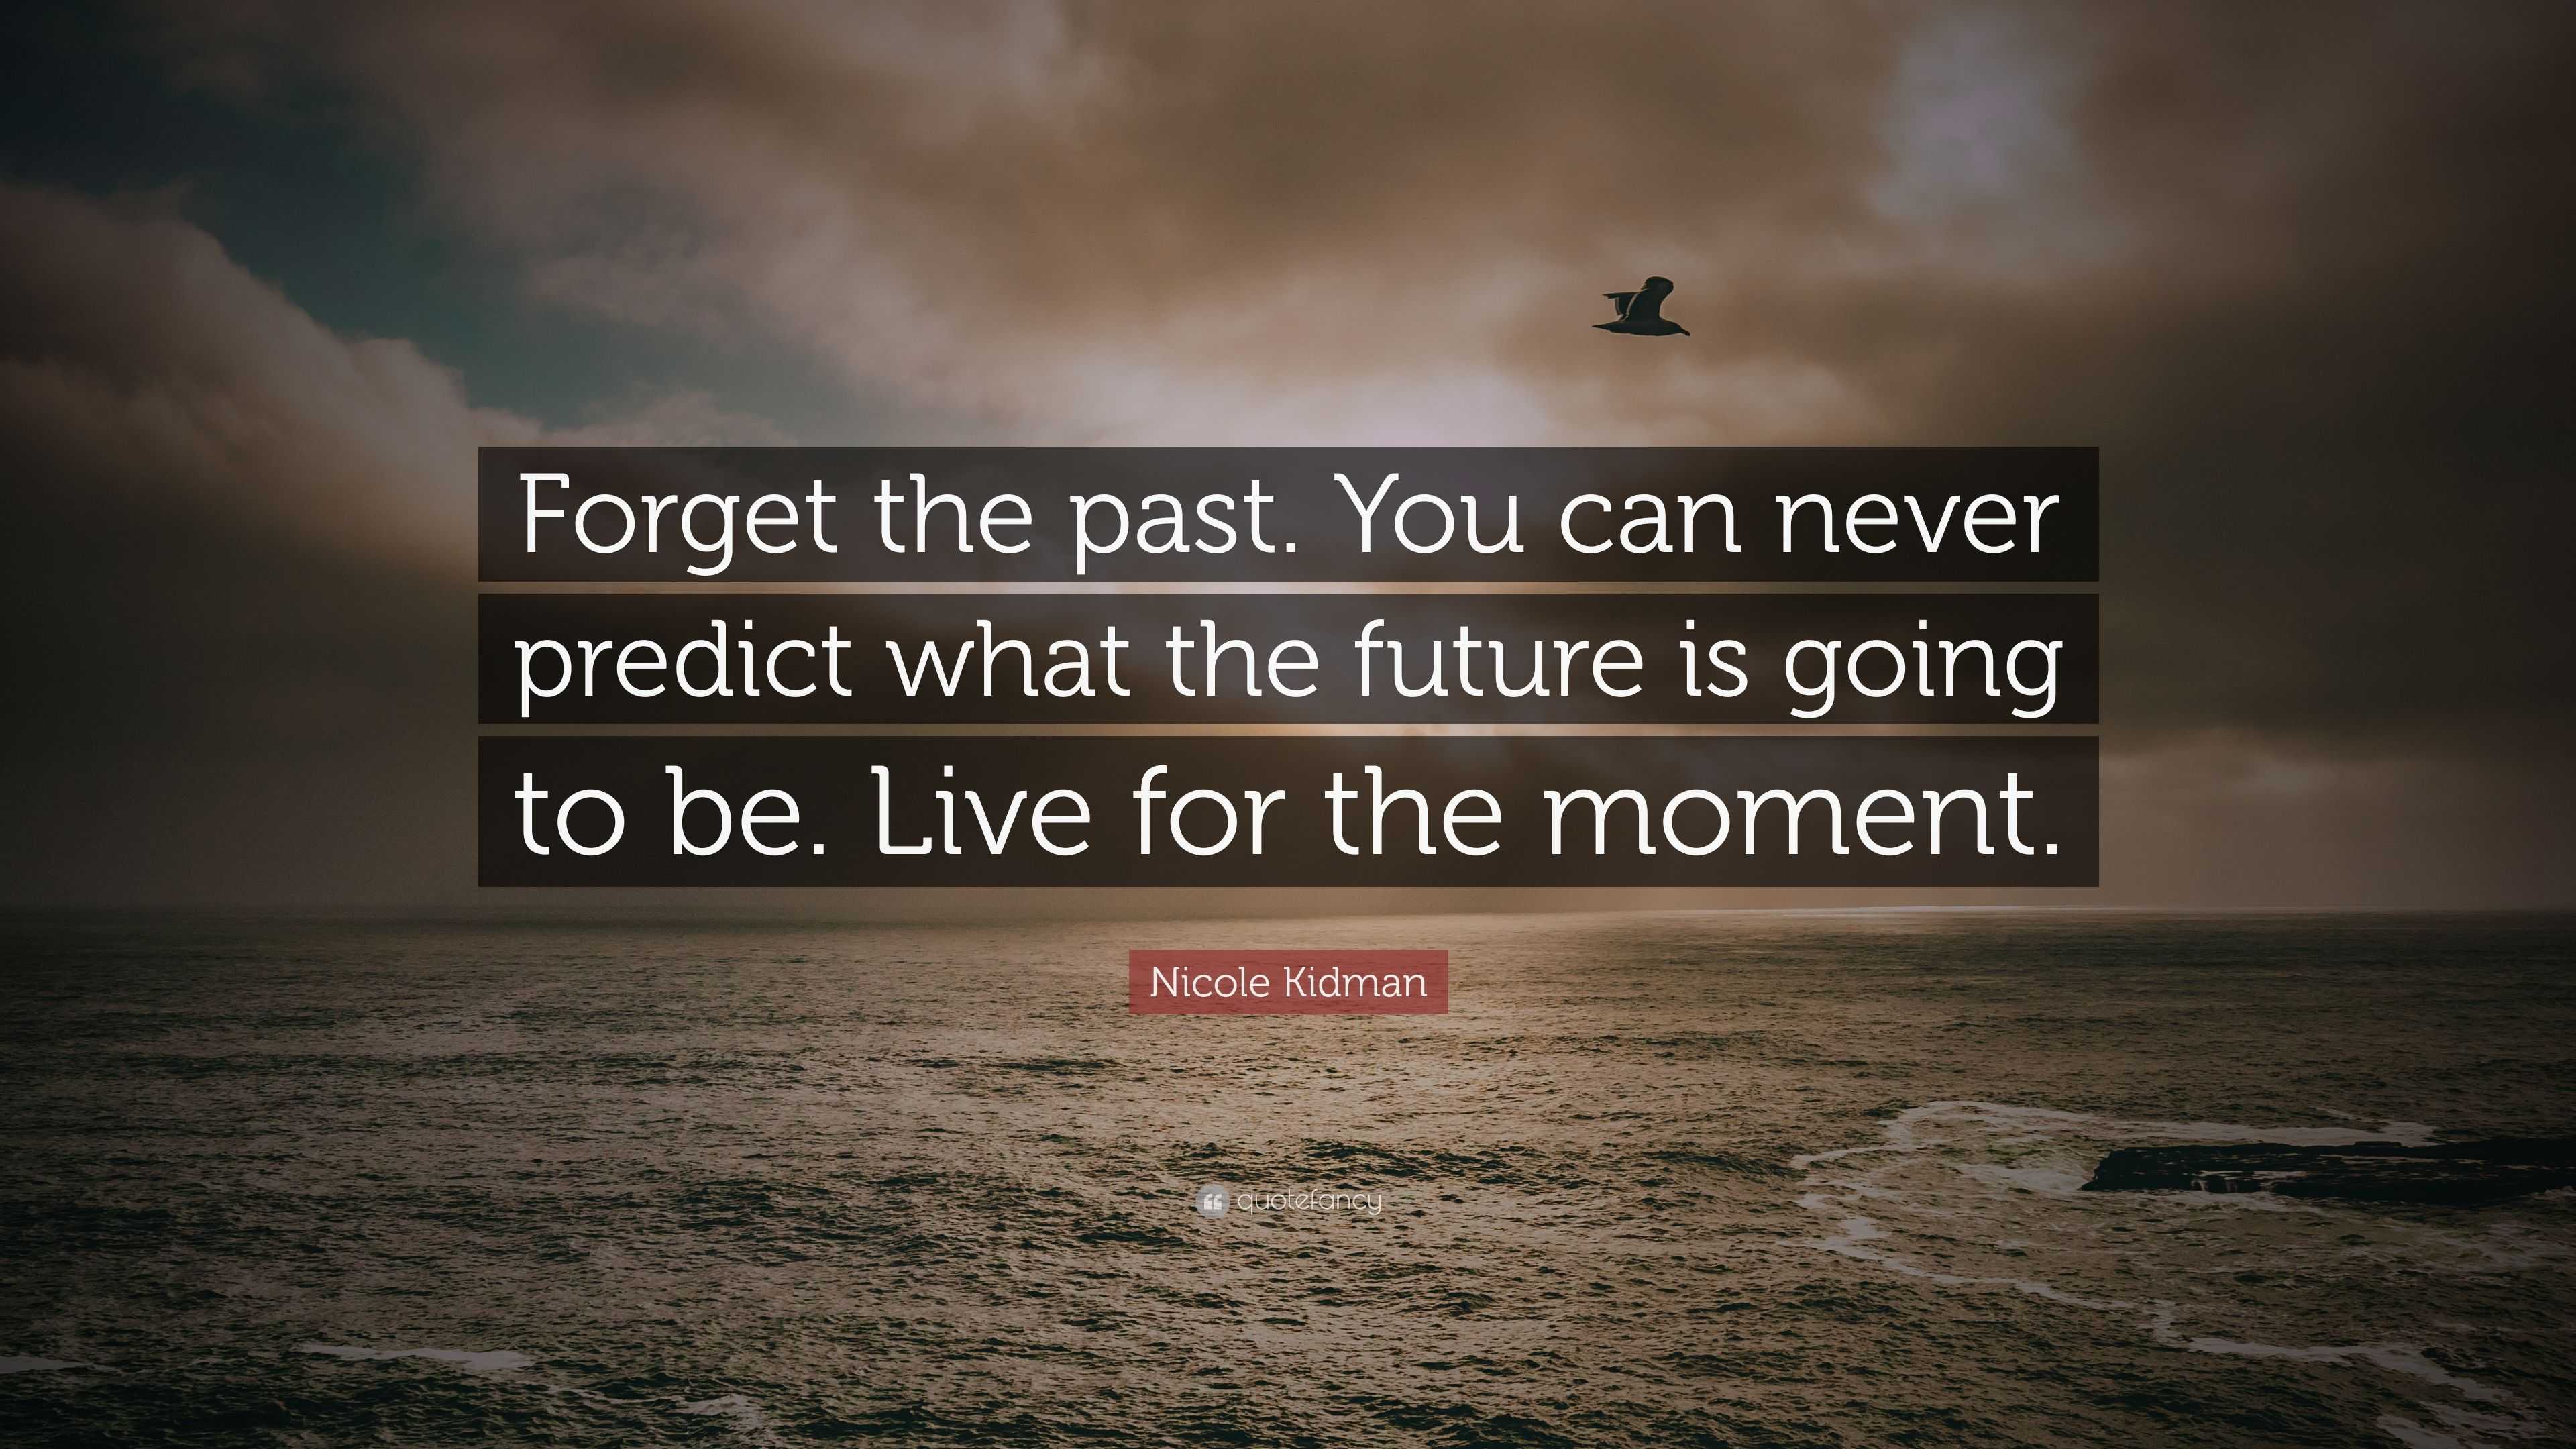 Nicole Kidman Quote: “Forget the past. You can never predict what the ...